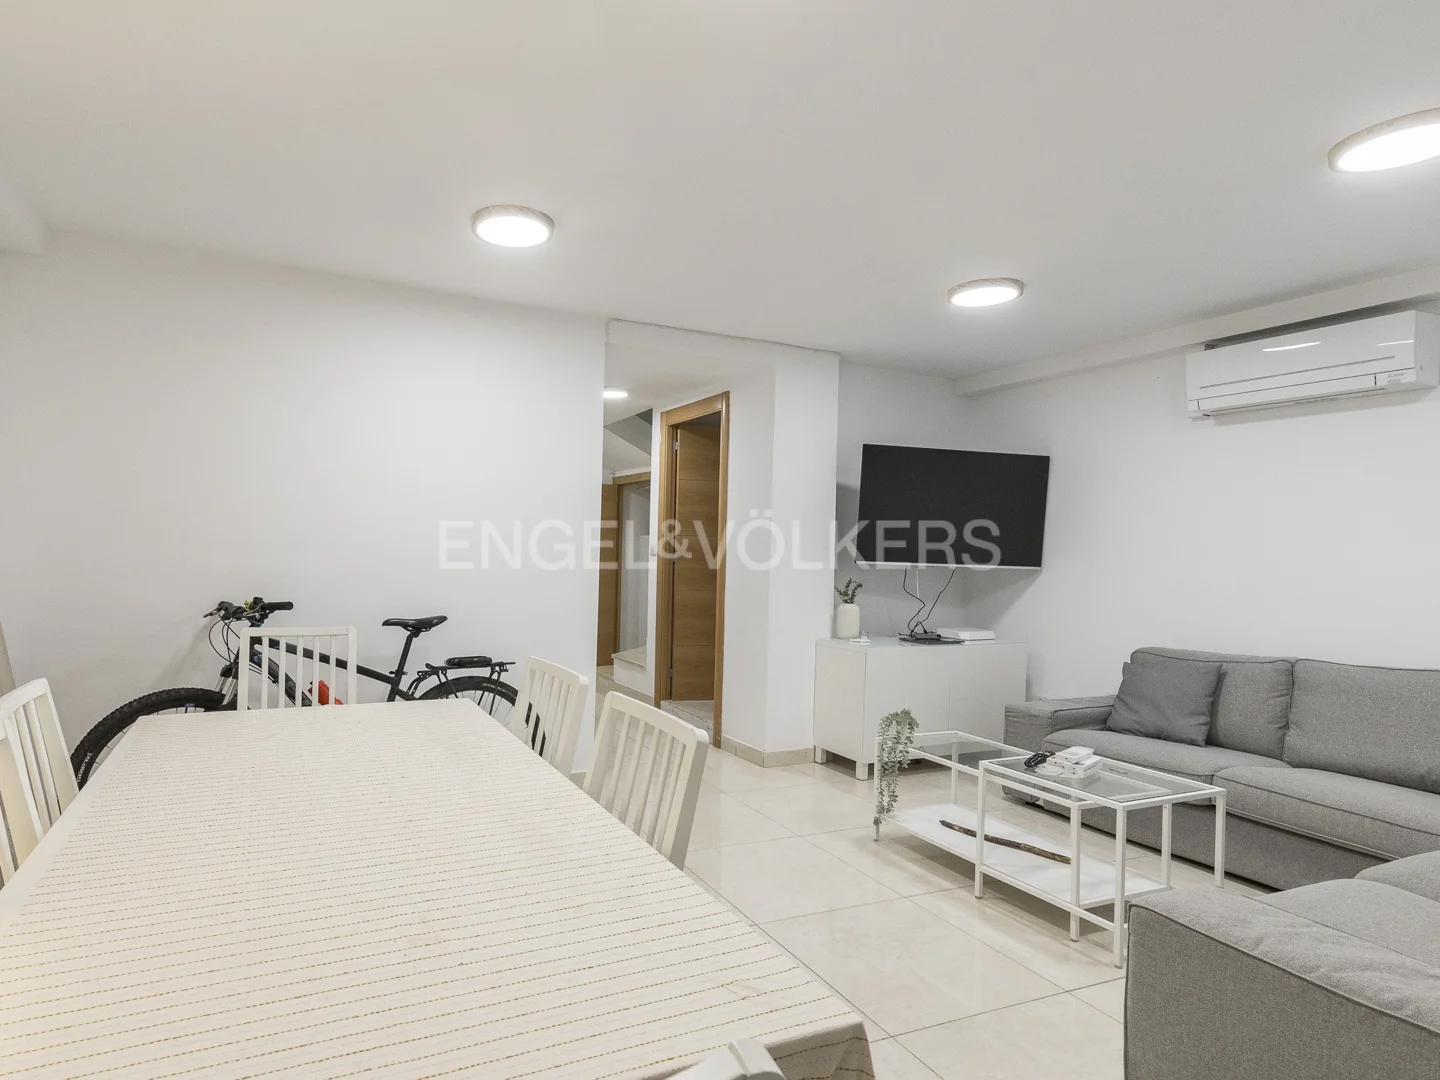 Newly renovated apartment with 6 bedrooms